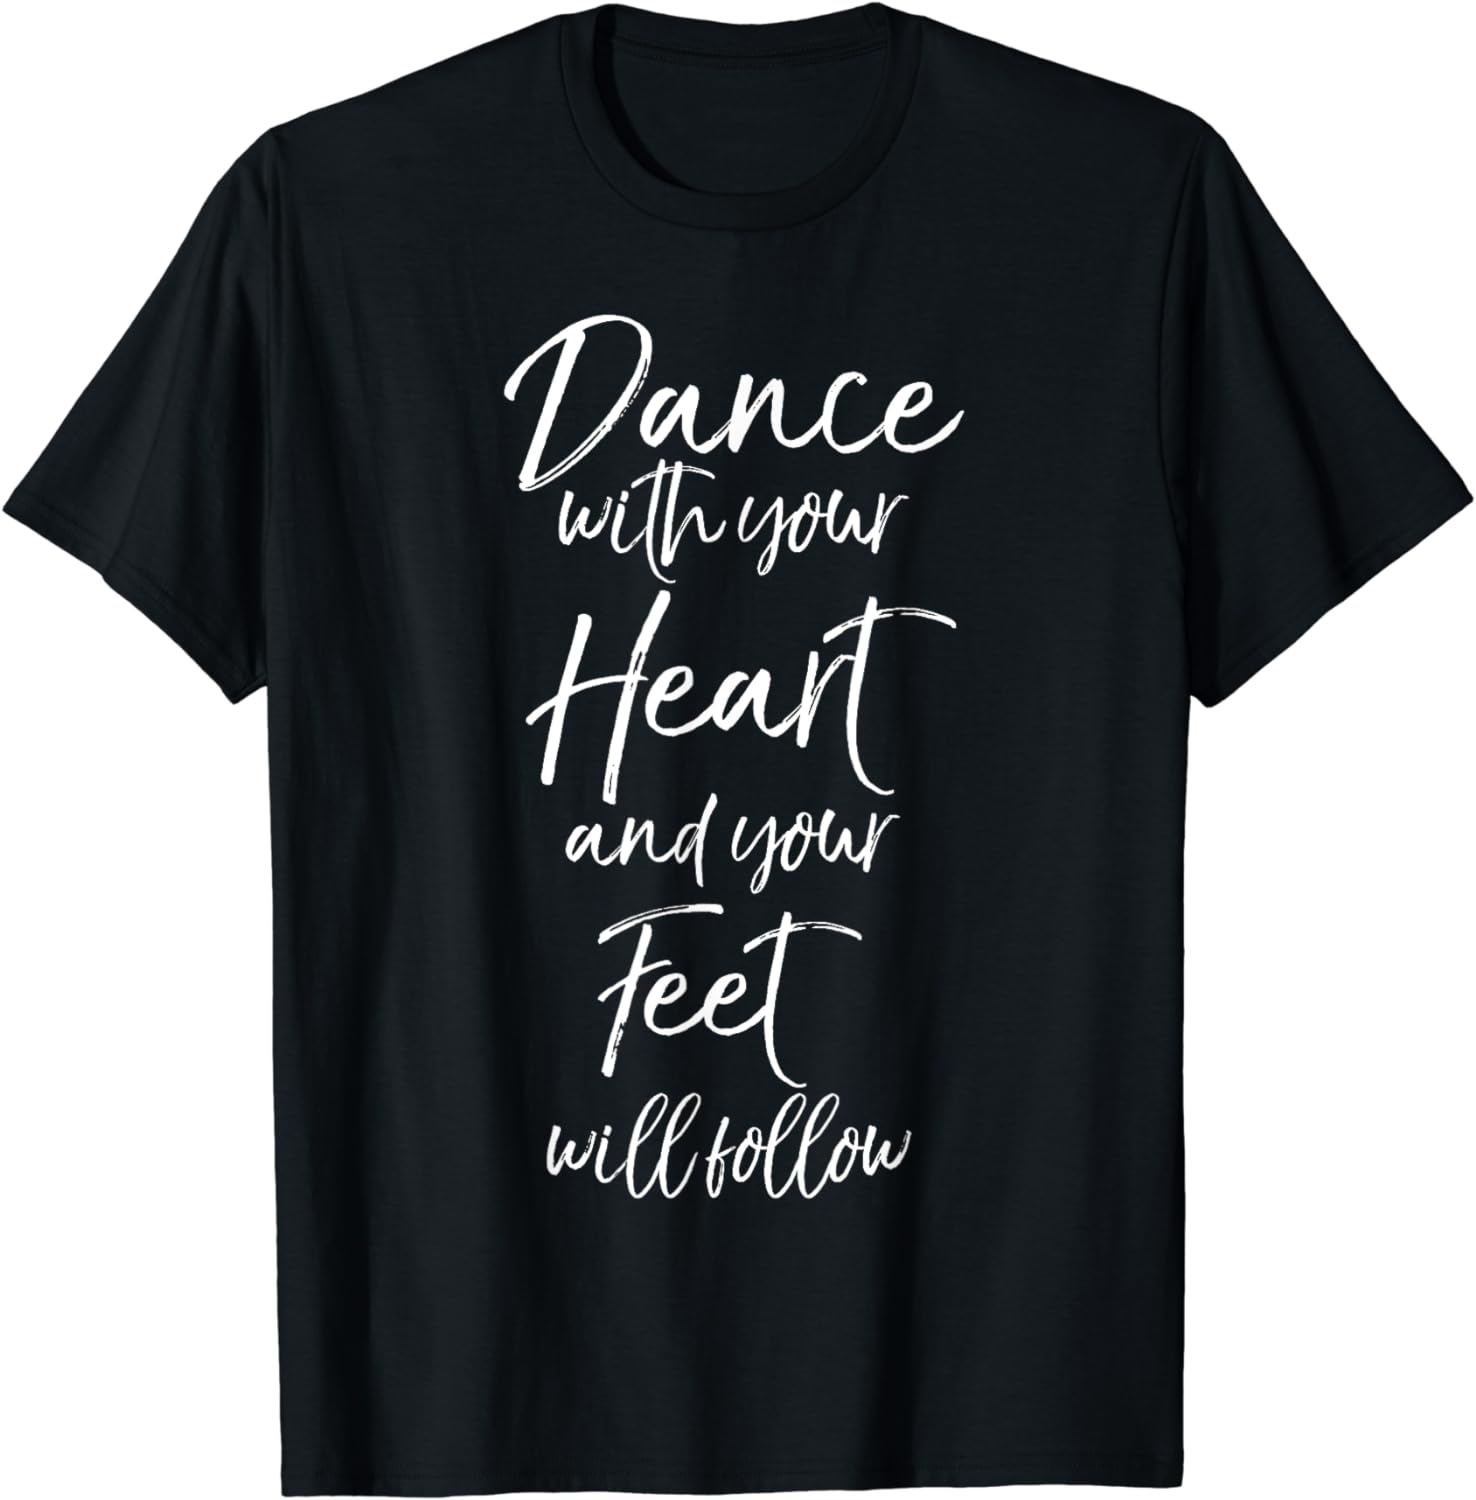 Cute Quote Dance with Your Heart and Your Feet will Follow T-Shirt ...